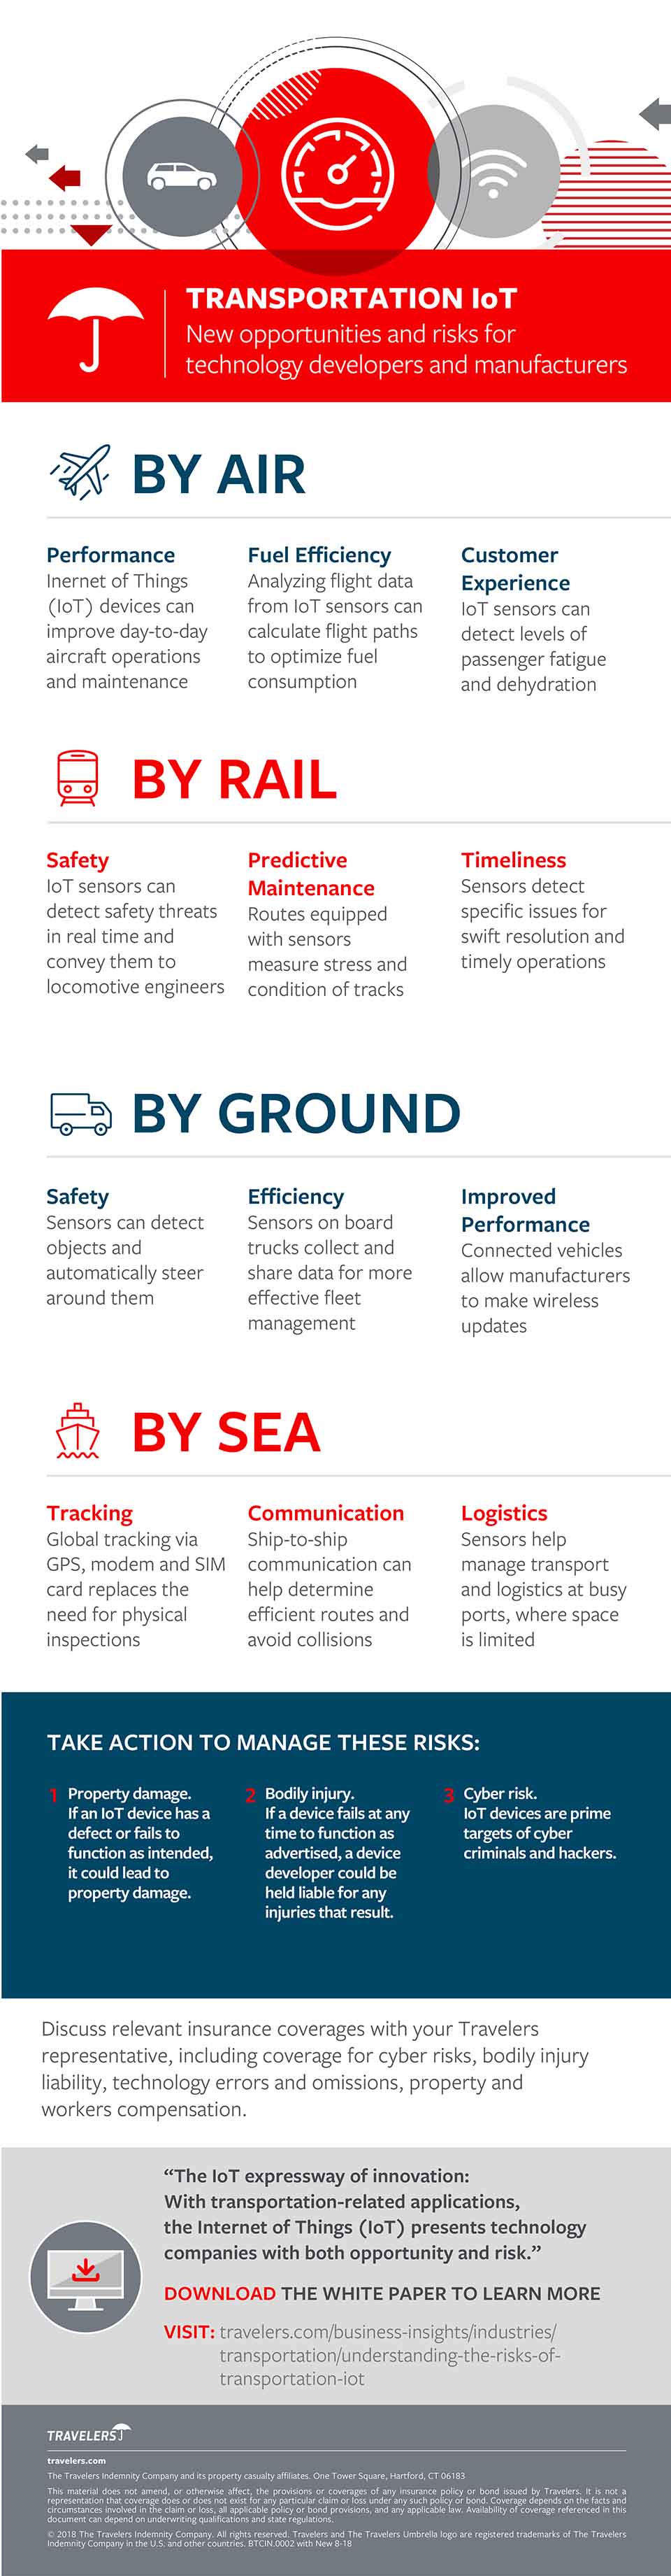 Transportation IoT Opportunities and Risks Infographic